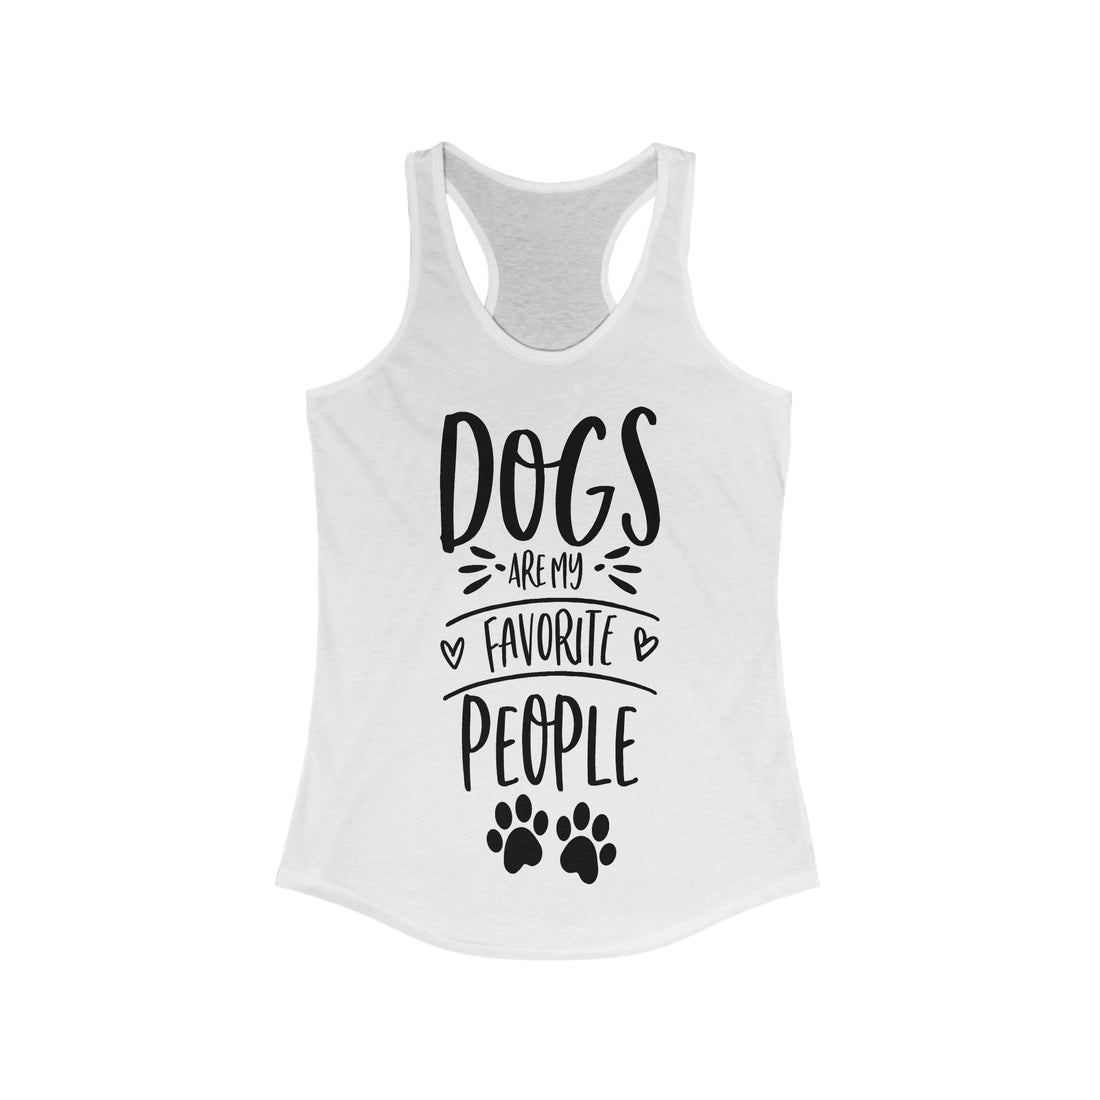 Dogs Are My Favorite People - Racerback Tank Top